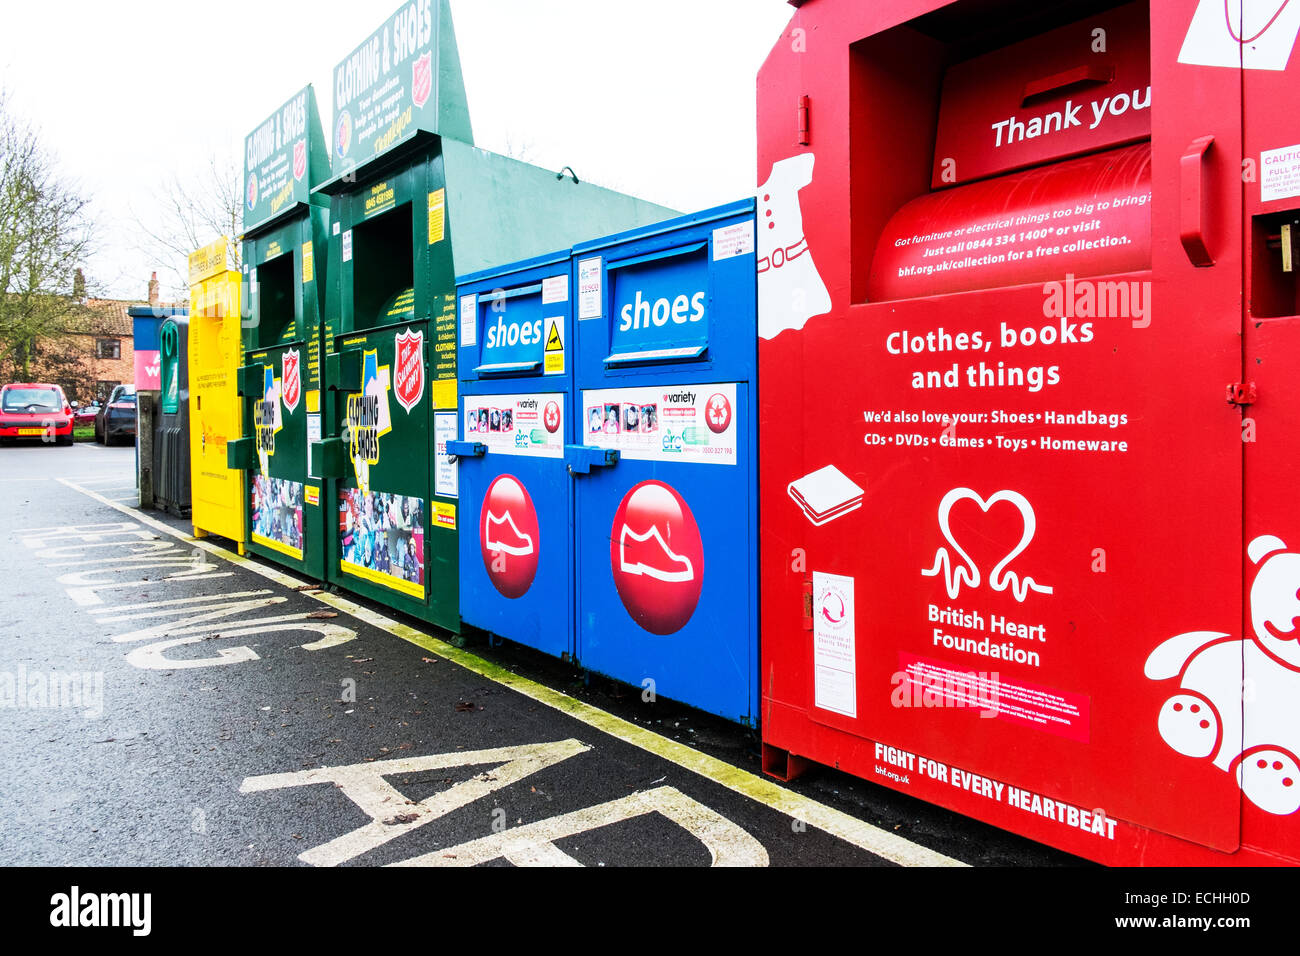 Recycling area charity bins collection collect disposal unwanted clothes shoes British heart foundation salvation army Stock Photo